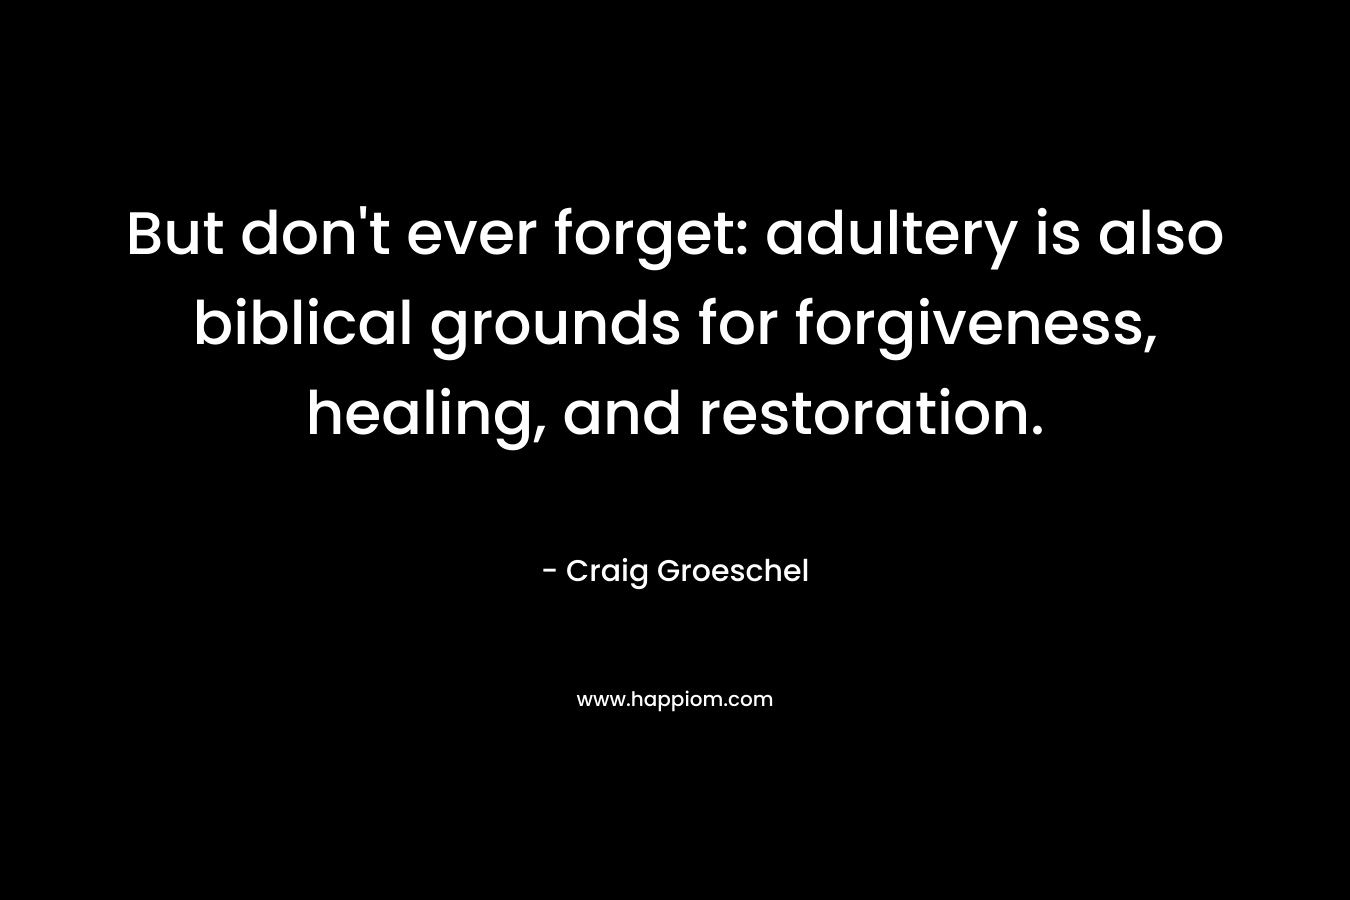 But don’t ever forget: adultery is also biblical grounds for forgiveness, healing, and restoration. – Craig Groeschel